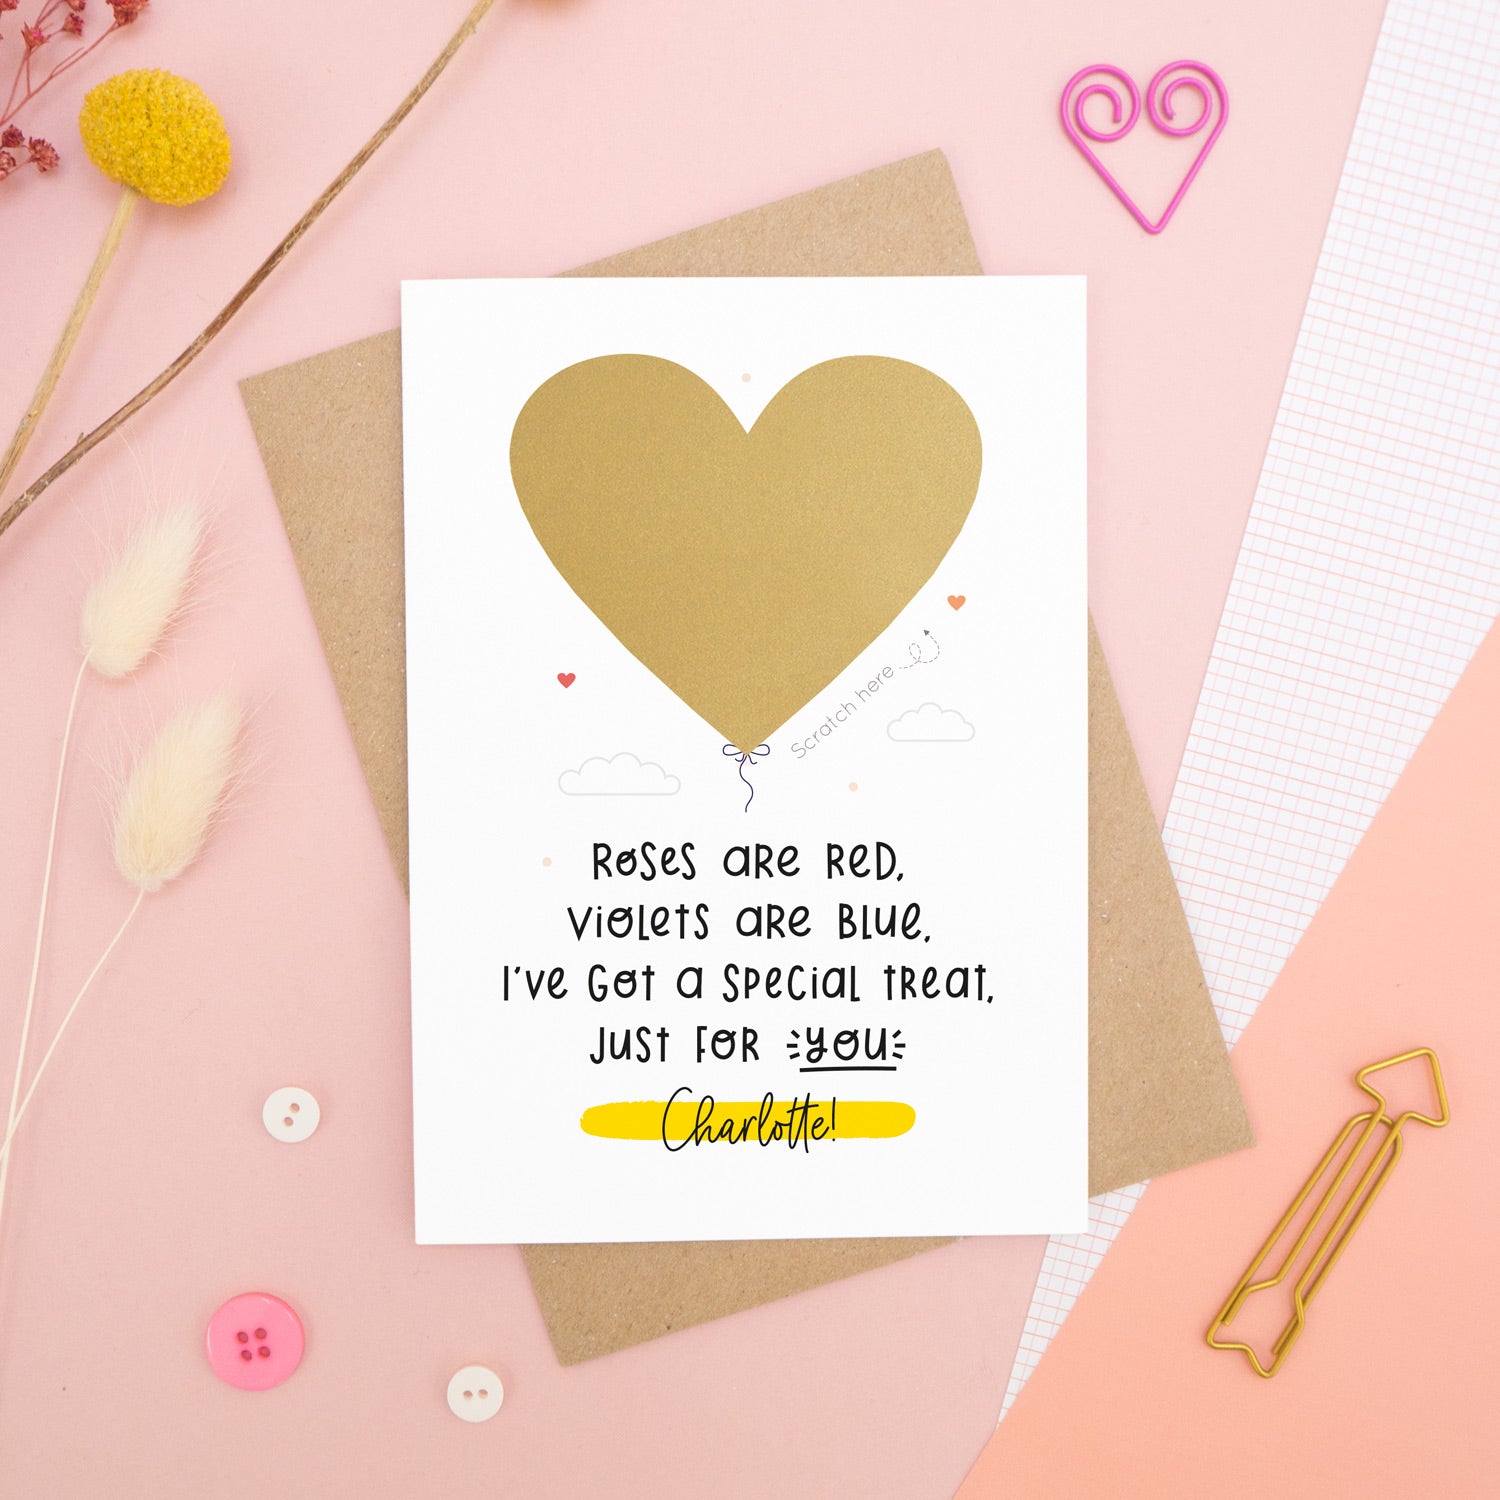 A personalised anniversary scratch card photographed on a pink background with floral props, paper clips, and buttons. This card shows the golden heart before it gets scratched off to reveal the secret message!